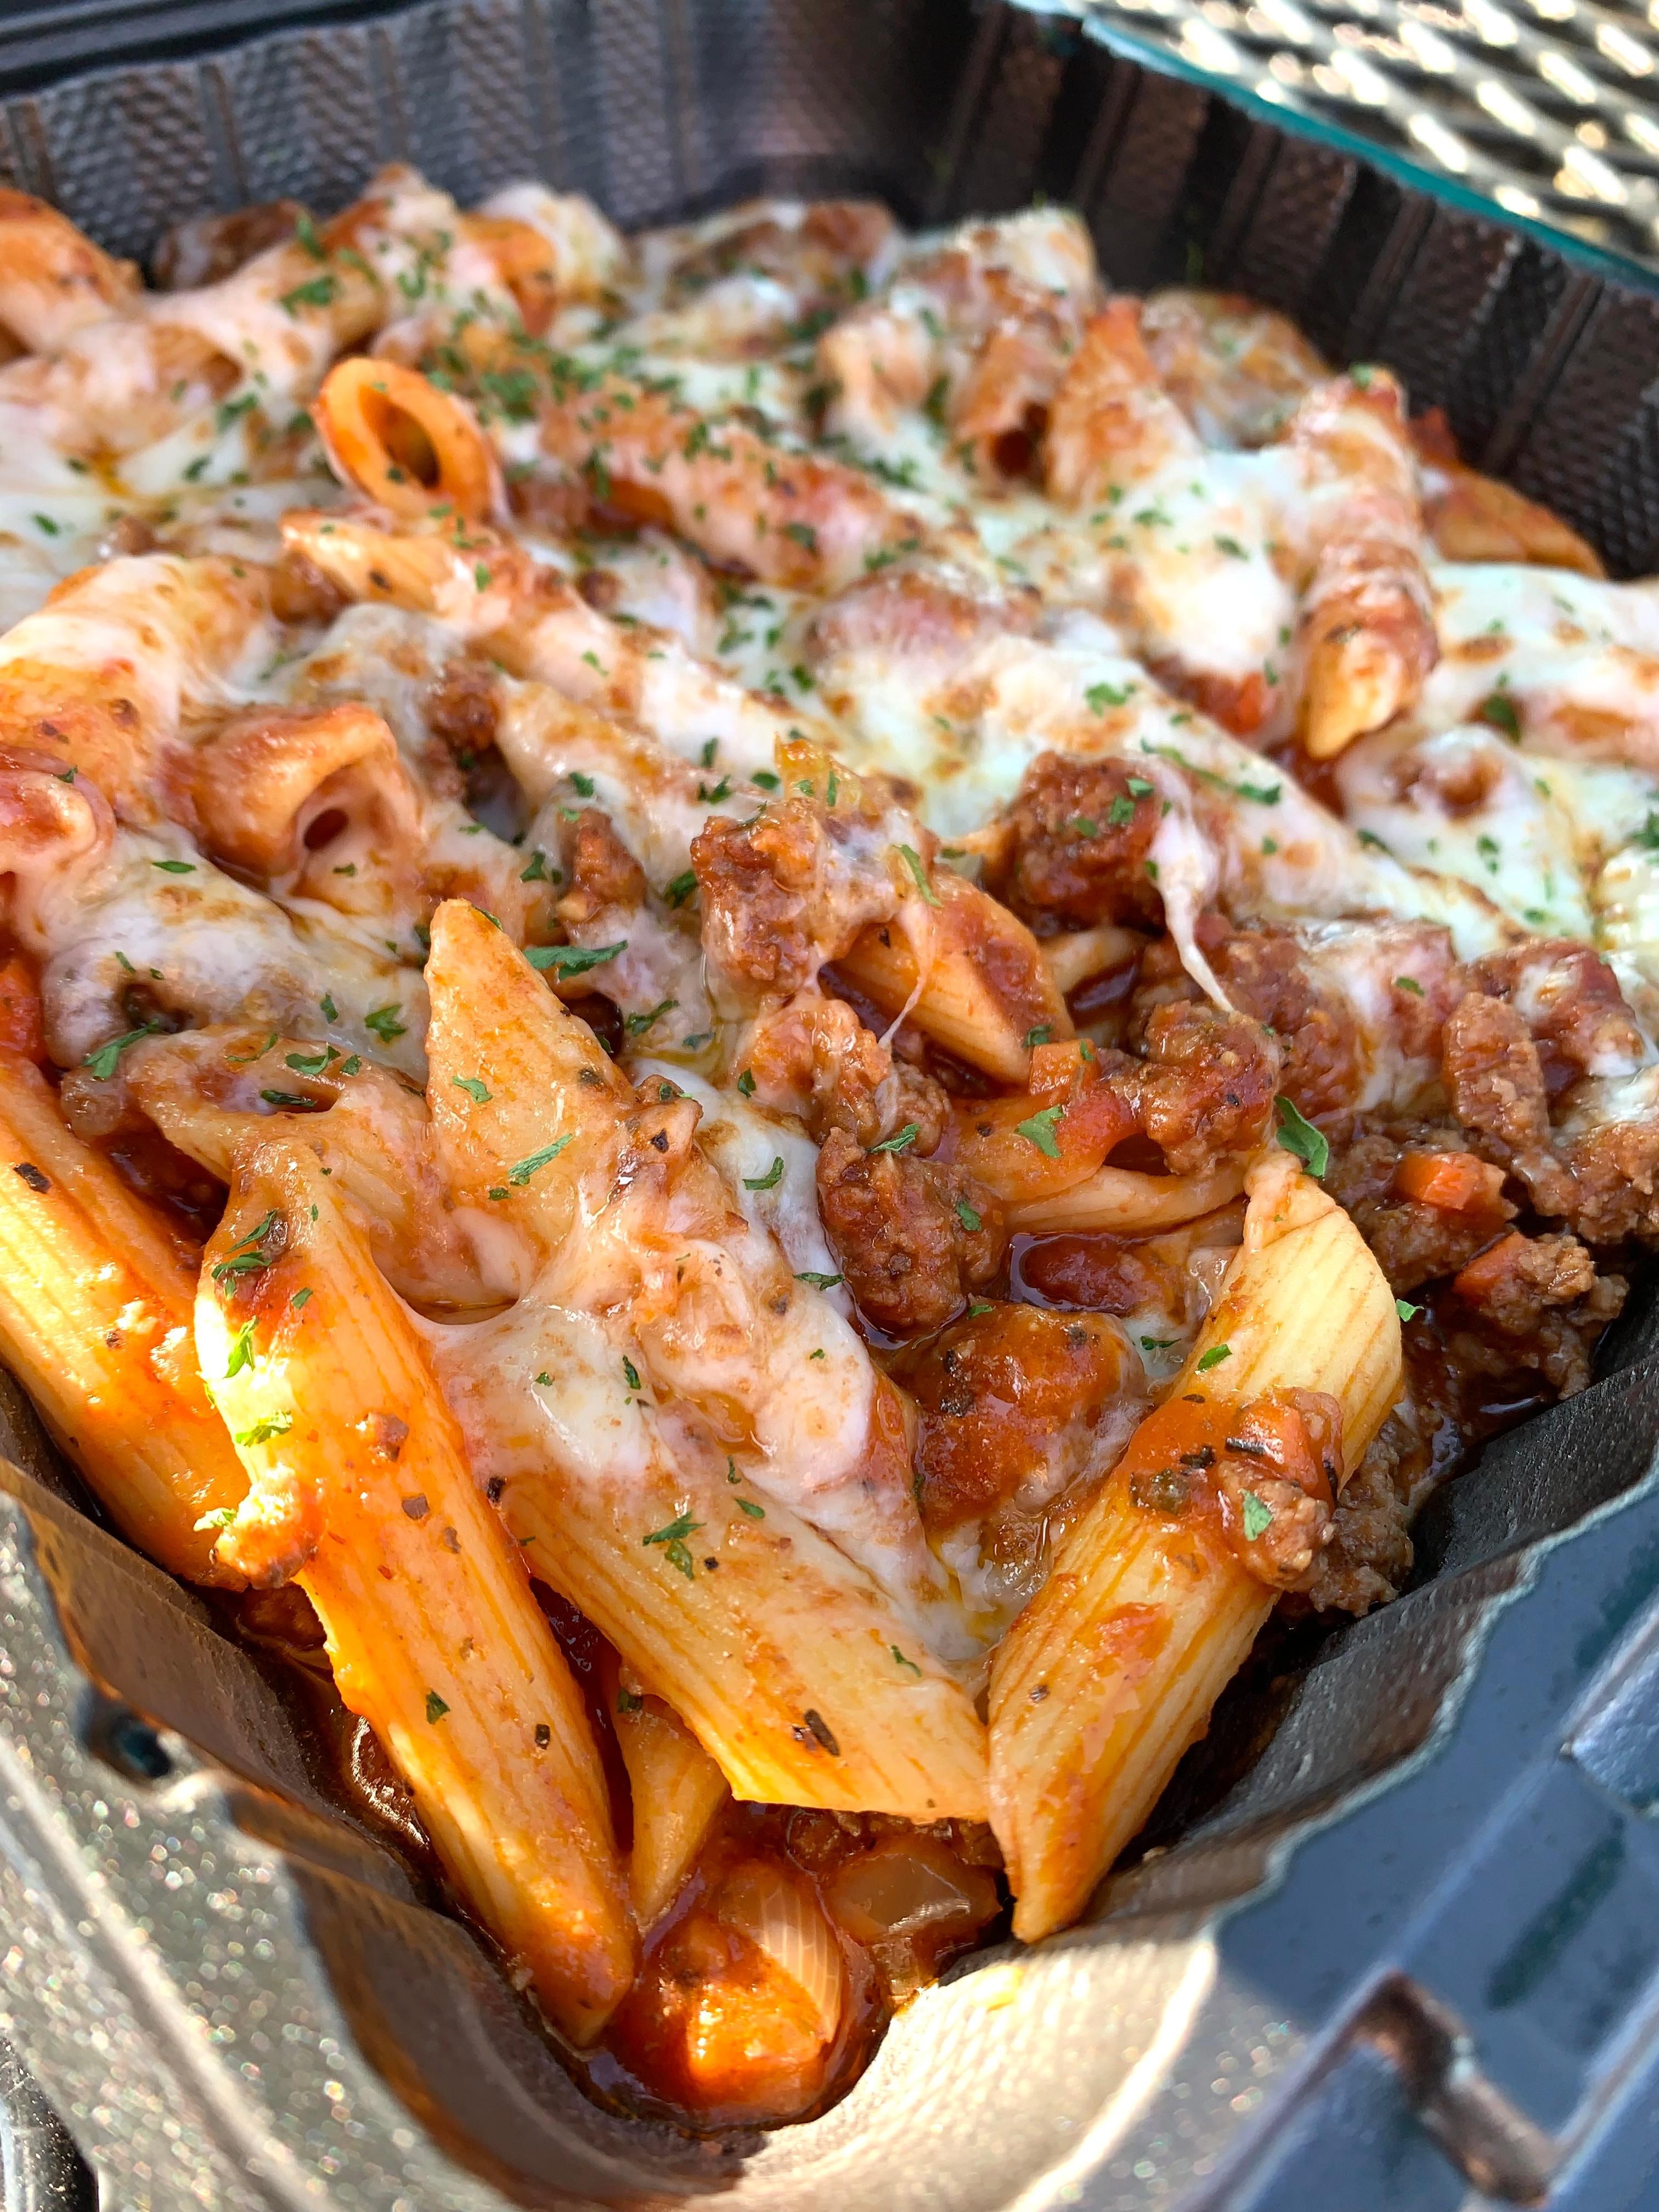 Penne with meat sauce